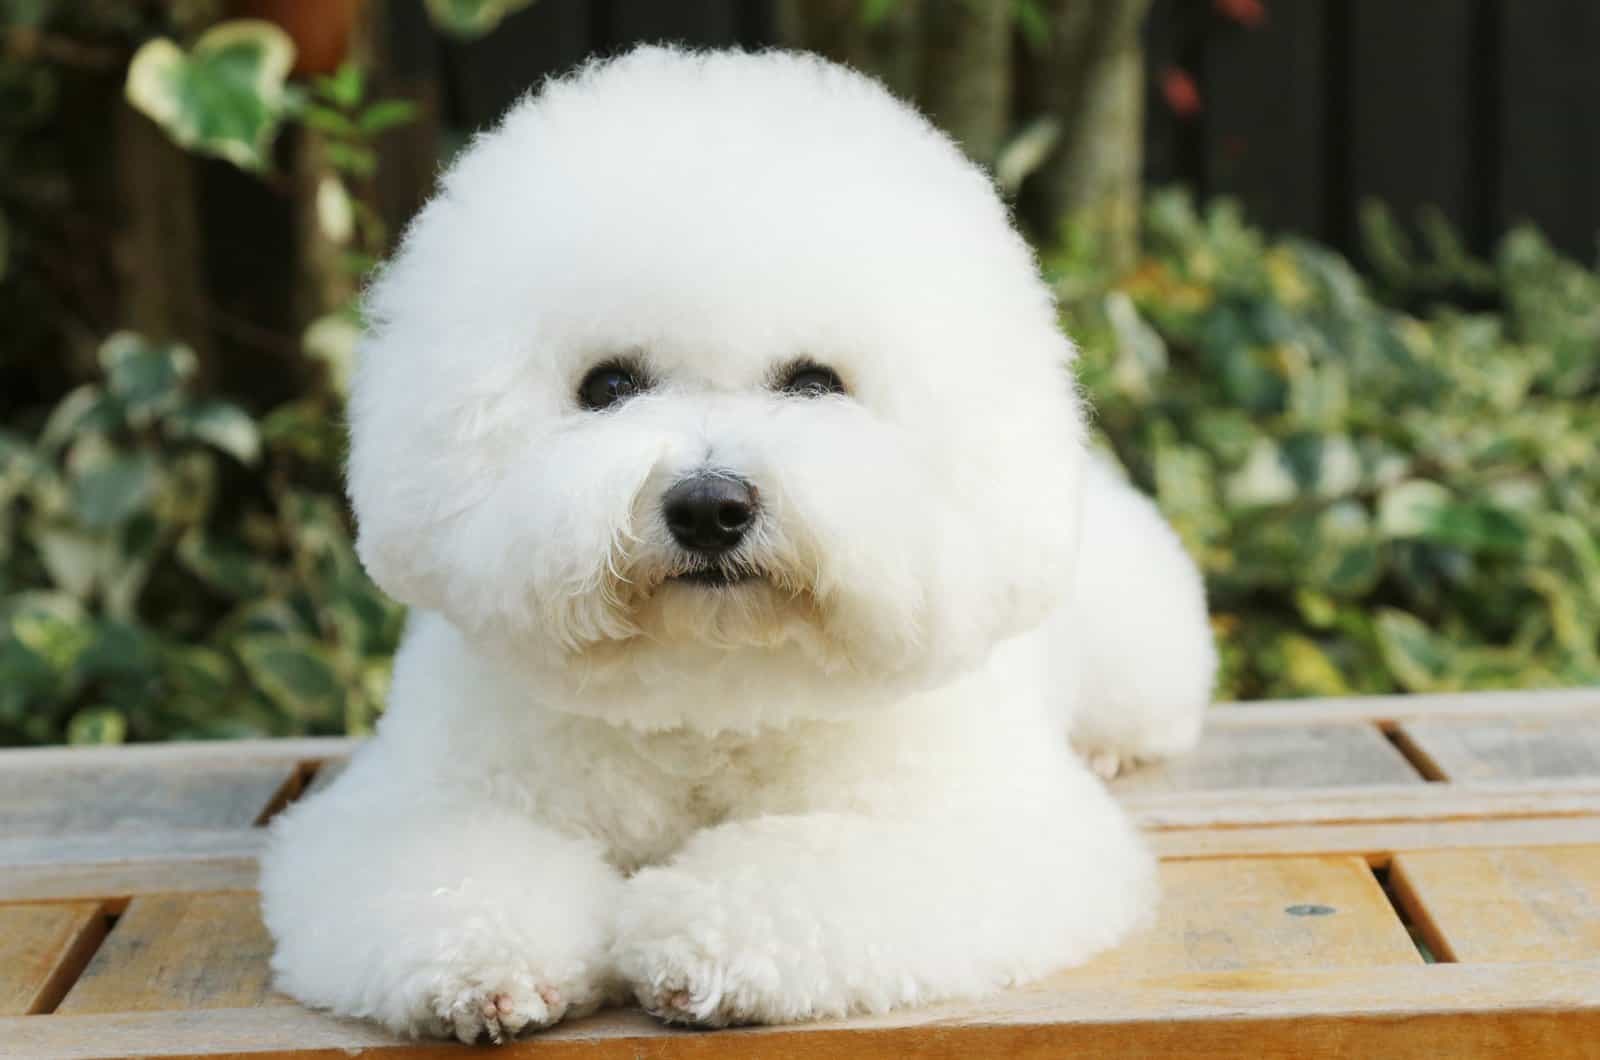 How Much Does A Bichon Frise Cost? Price And Expenses